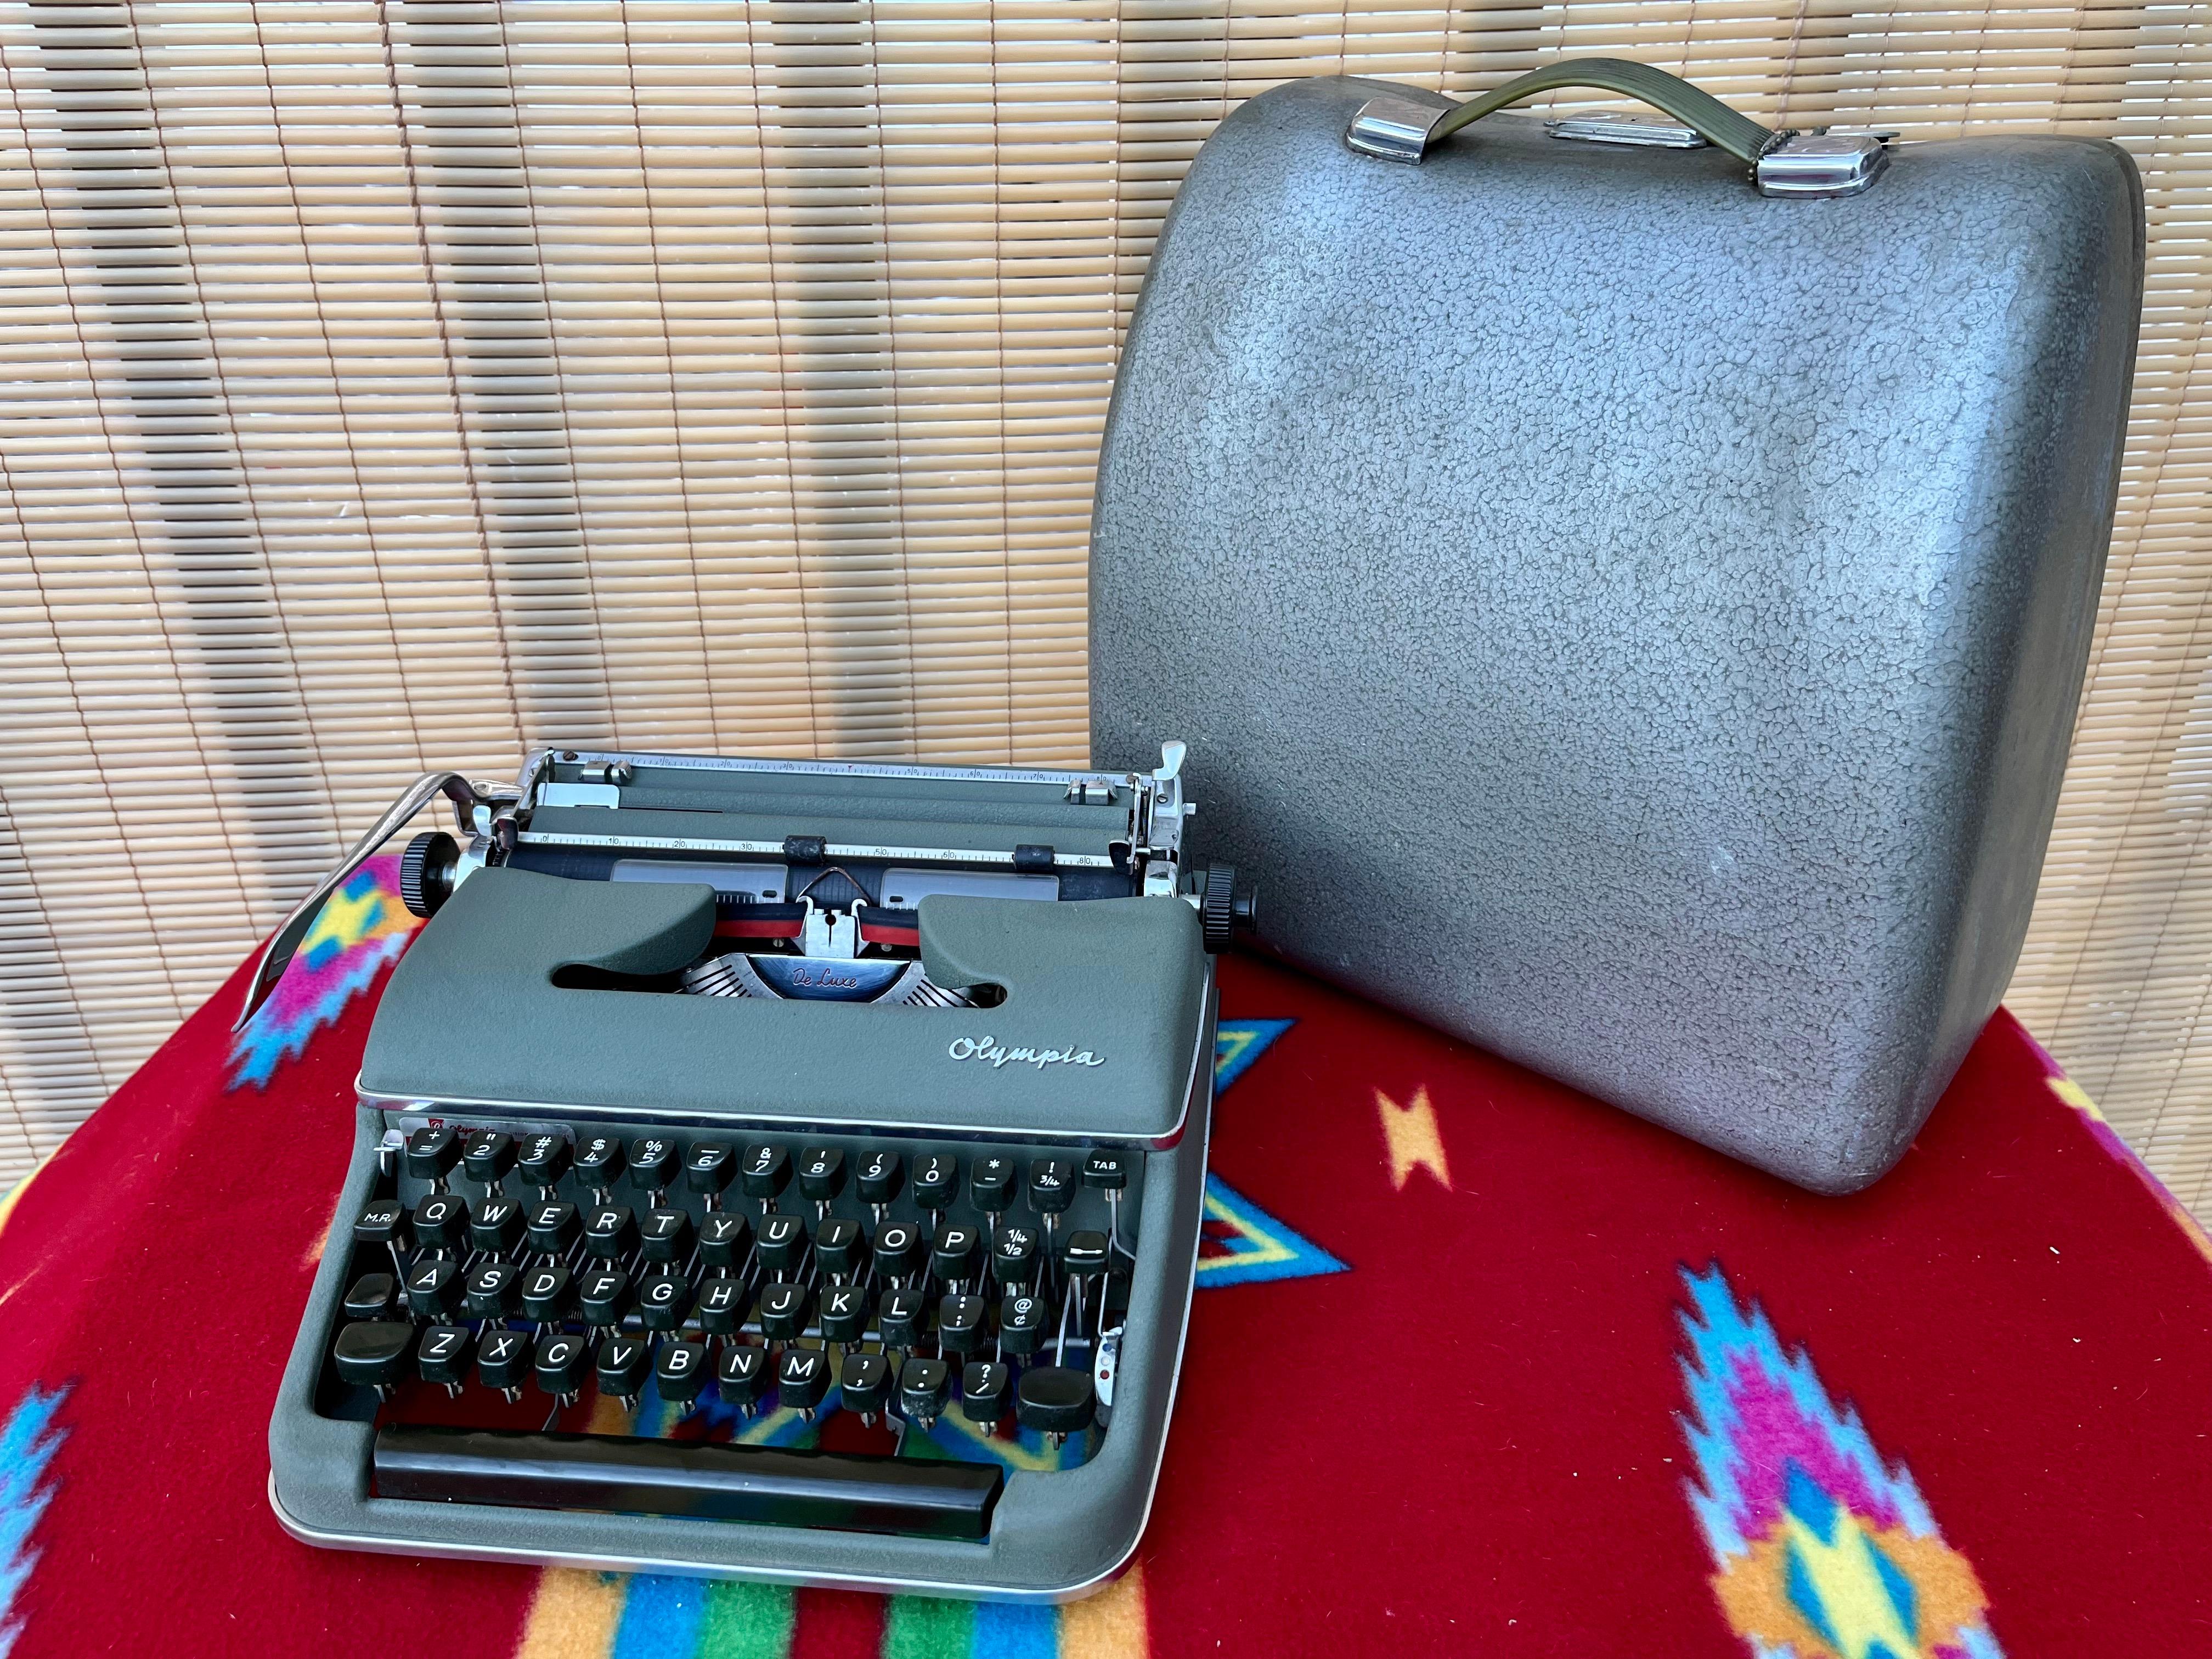 Vintage Mid-Century Modern Olympia SM3 portable typewriter with the original metal case. Circa 1950s. 
Features a Qwerty keyboard, a grayish green color body with chrome trims and the original metal case with a galvanized-like finish and the